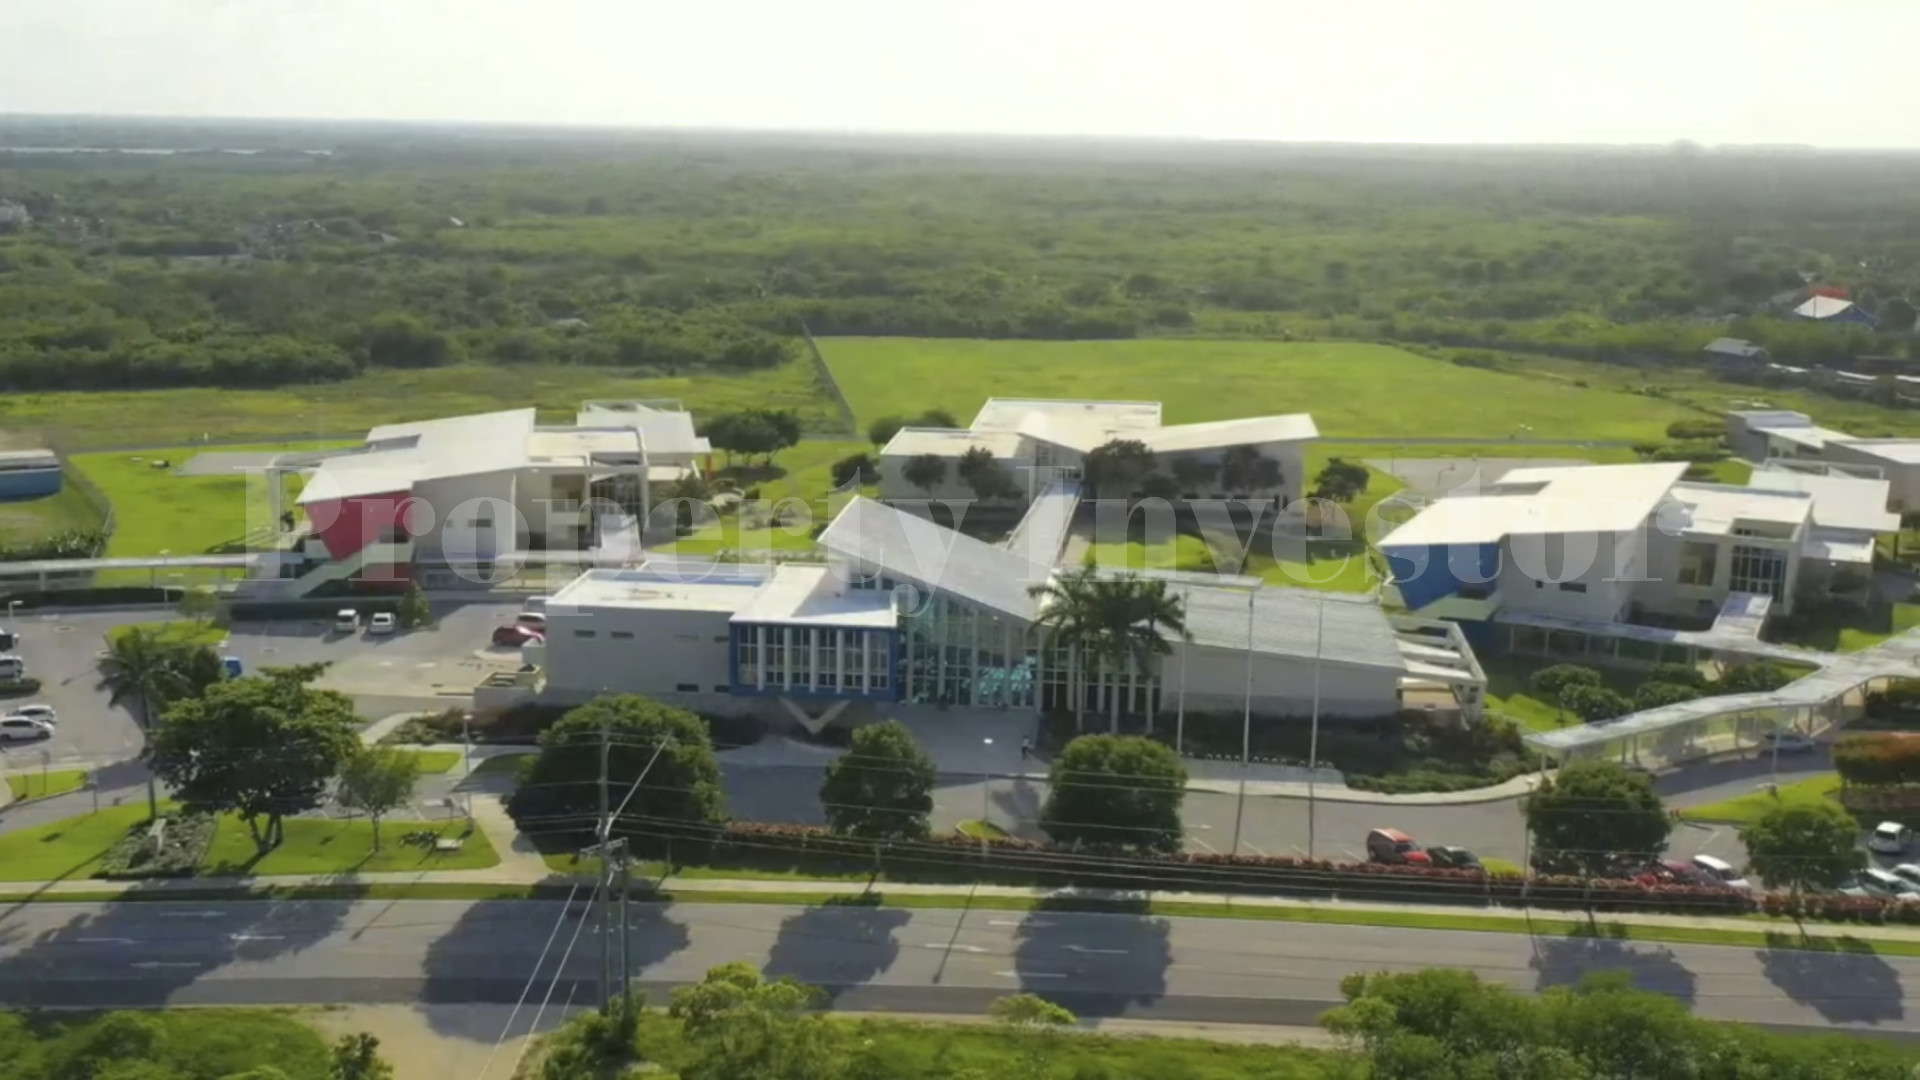 Exclusive Off-Plan Apartment Building Project for Sale in Grand Cayman, Cayman Islands